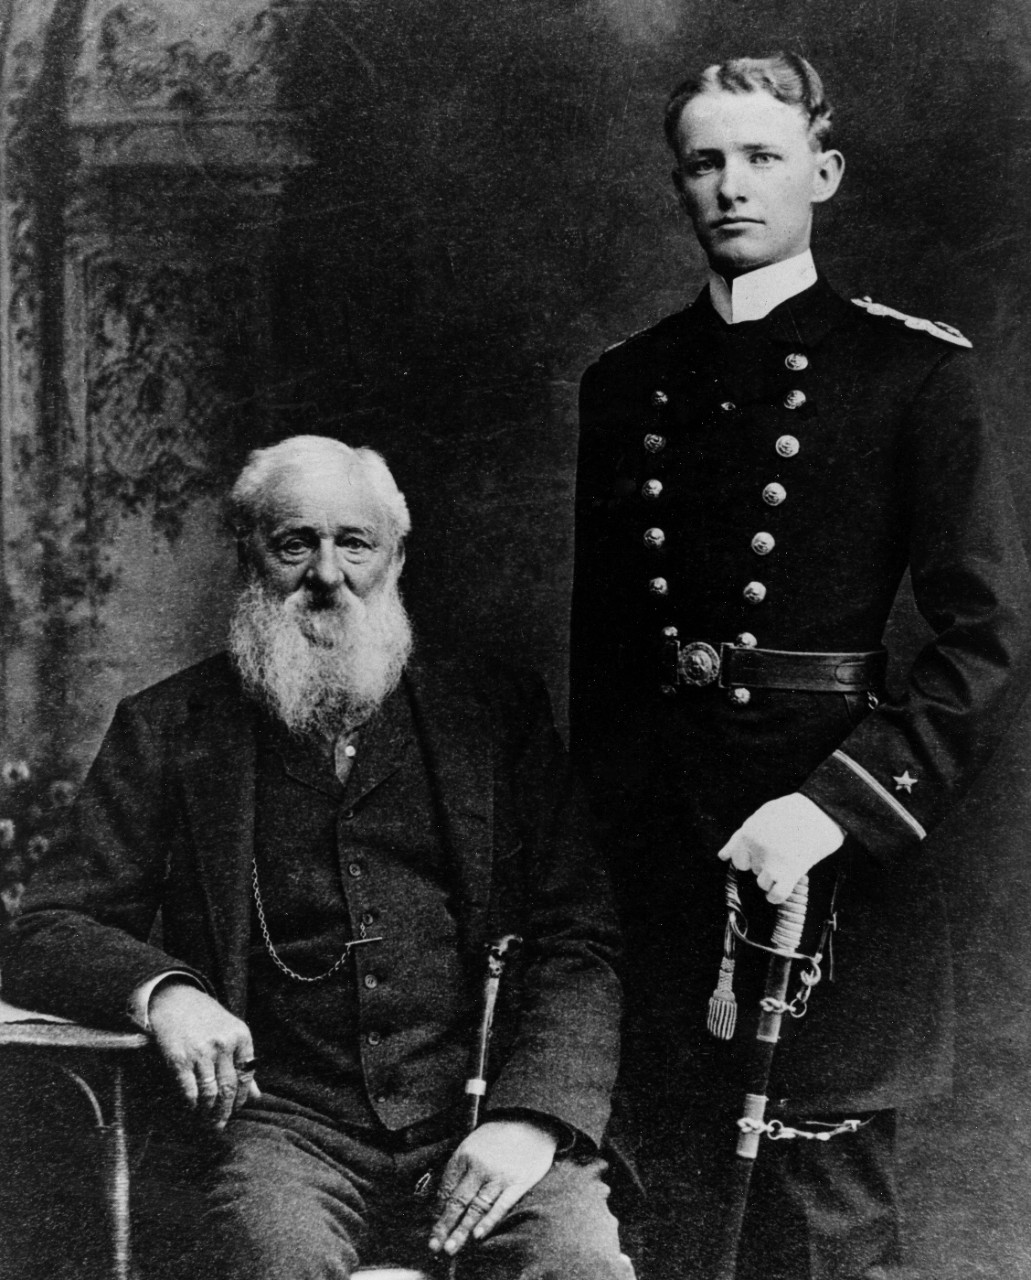 Passed Midshipman Chester W. Nimitz, USN, is shown with his grandfather, c. 1905, and probably taken in Texas. His grandfather was a retired Merchant Marine captain who greatly influenced him in having a Navy career